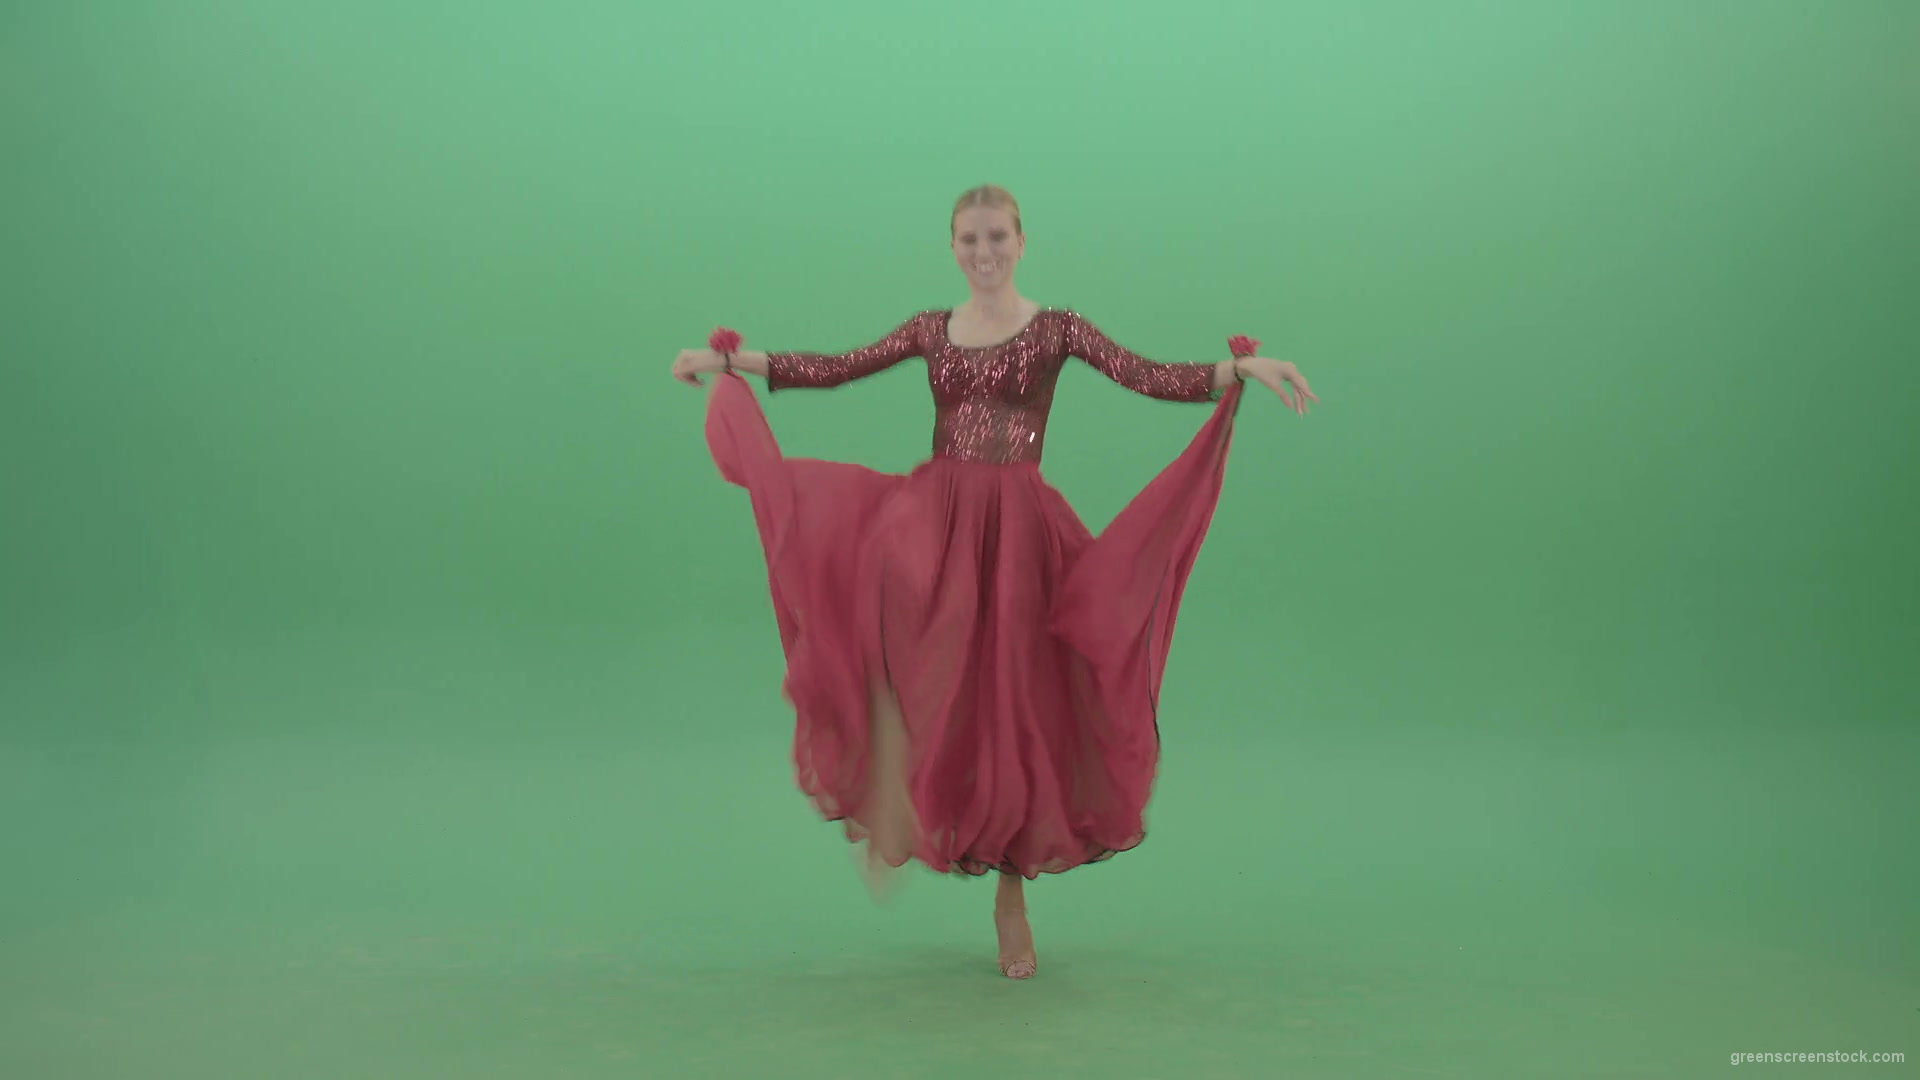 Moulin-rouge-dancing-girl-in-red-dress-jumping-on-green-screen-4K-Video-Footage-1920_004 Green Screen Stock